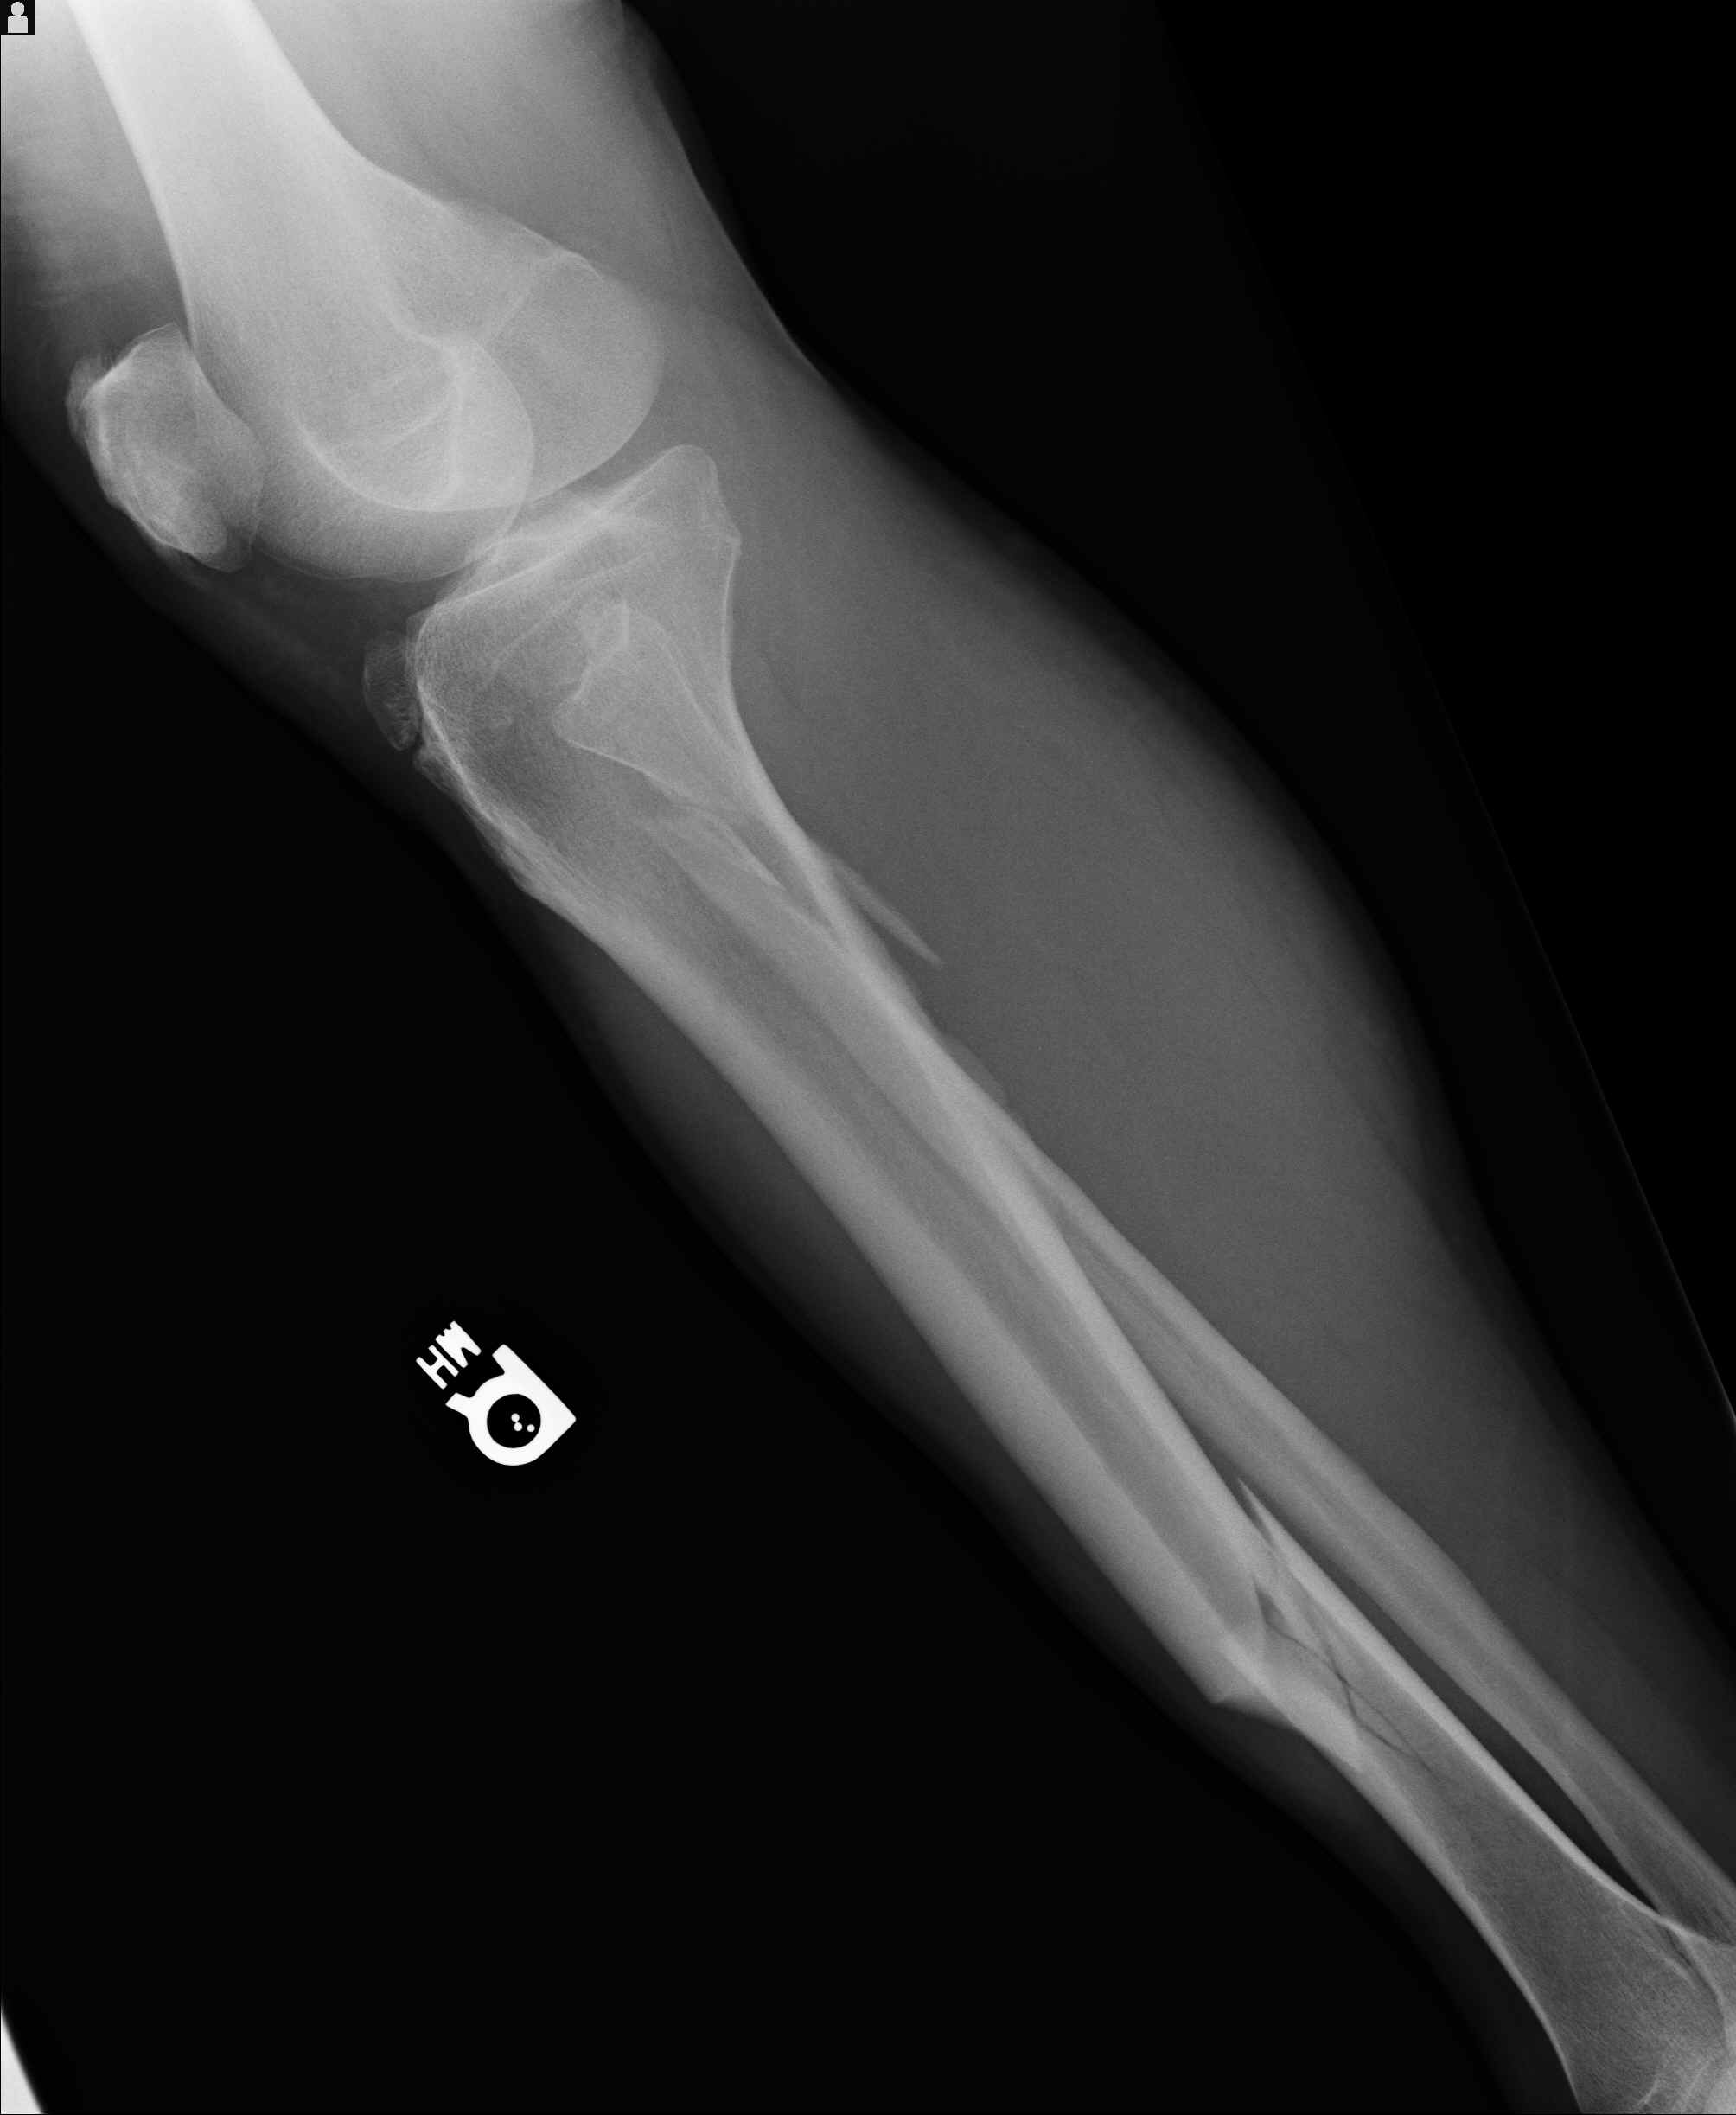 Broken Leg 2nd X-Ray : Biological Science Picture ...